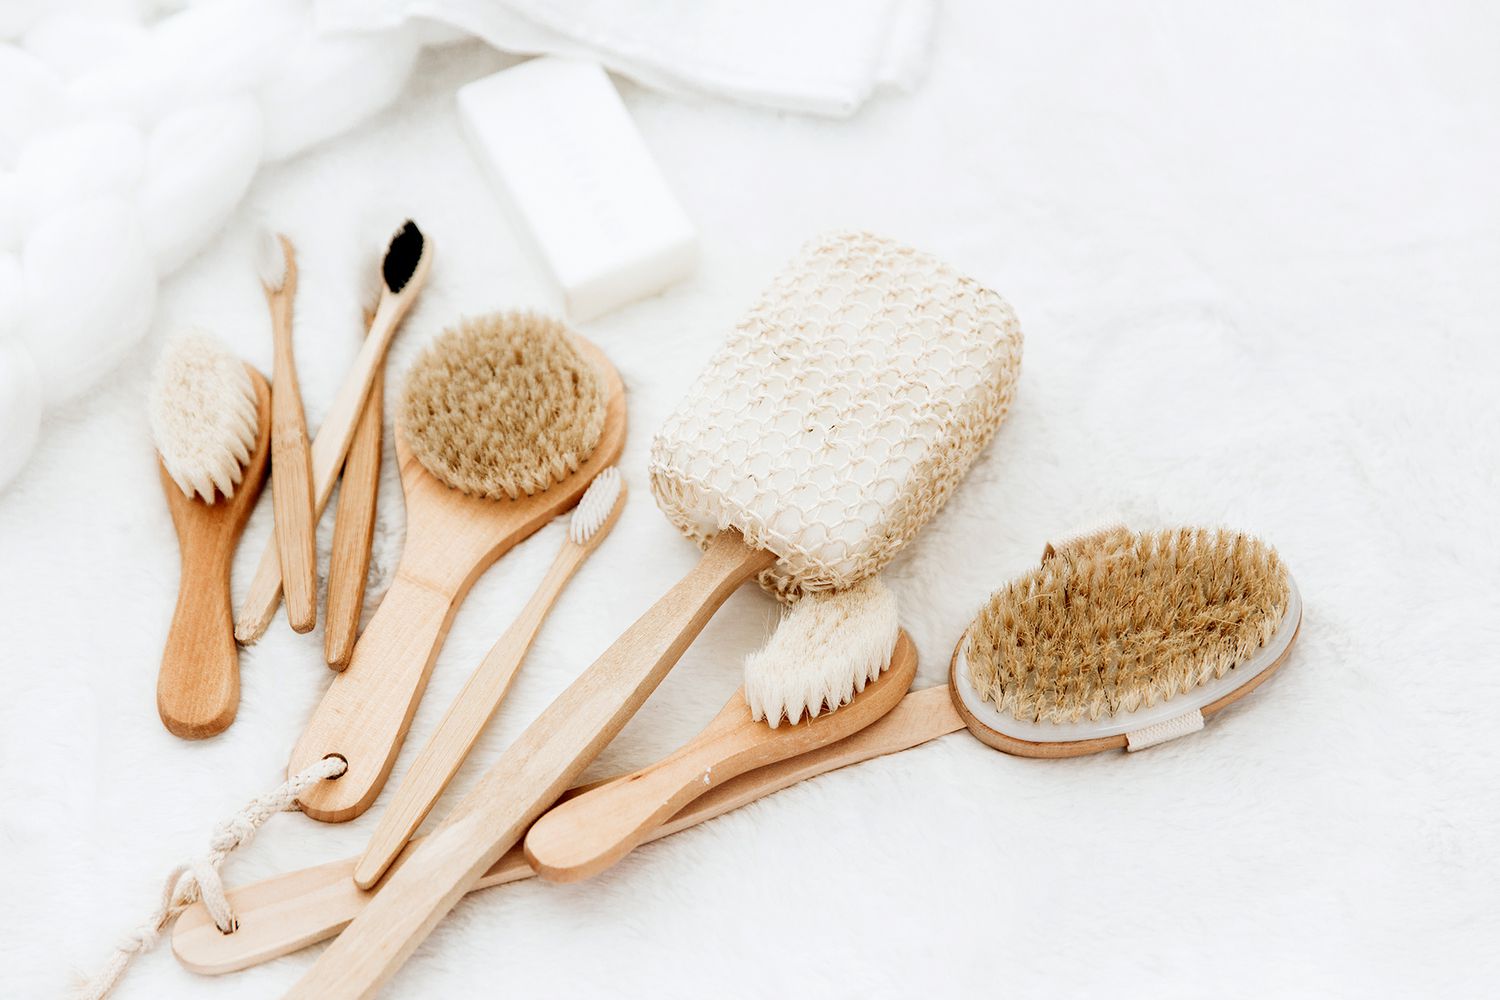 Variety of brushes with wooden handles